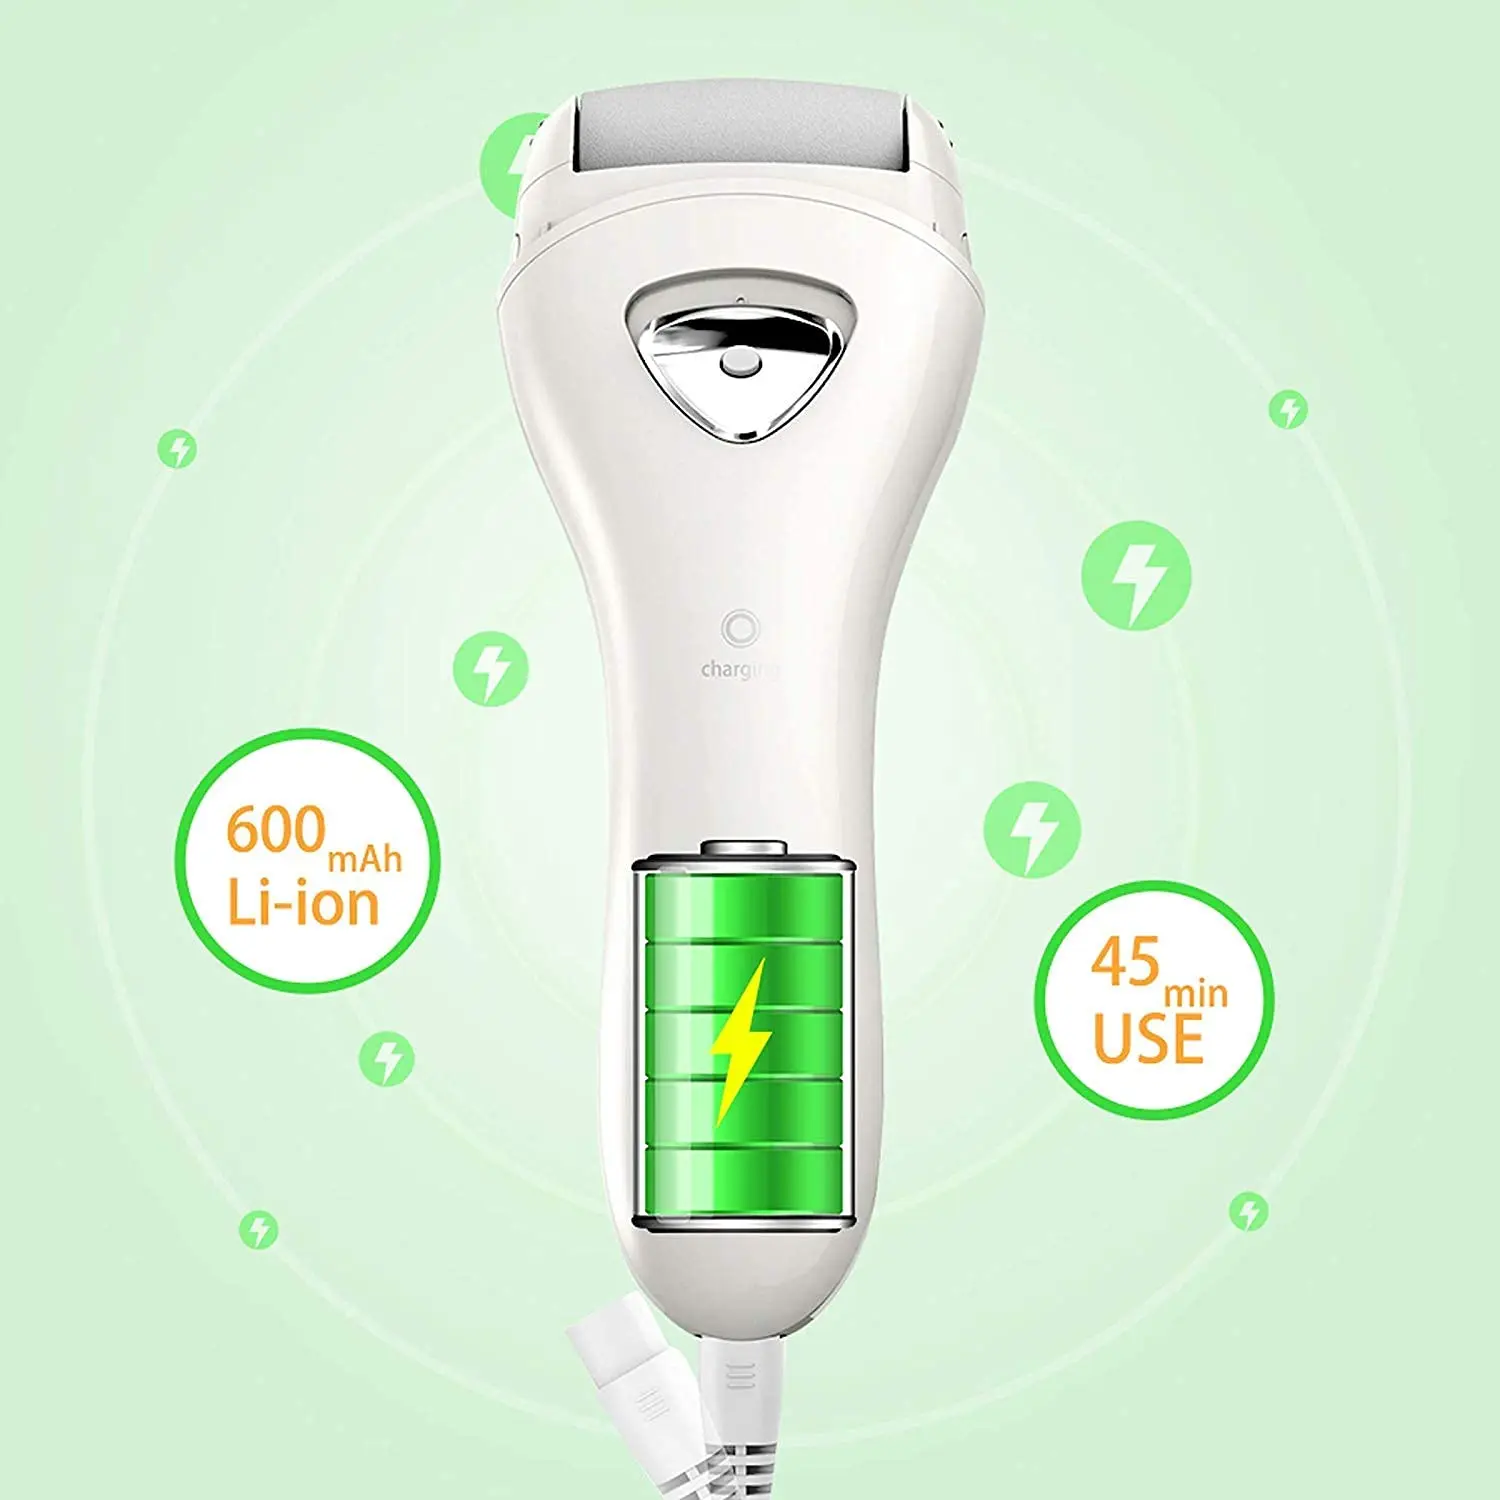 https://ae01.alicdn.com/kf/Ac892b85c21da47f9ab20bbd3e085742f6/Pritech-Charged-Electric-Callus-Remover-for-Heels-Grinding-Pedicure-Tools-Professional-Pedi-Foot-File-Care-for.jpg